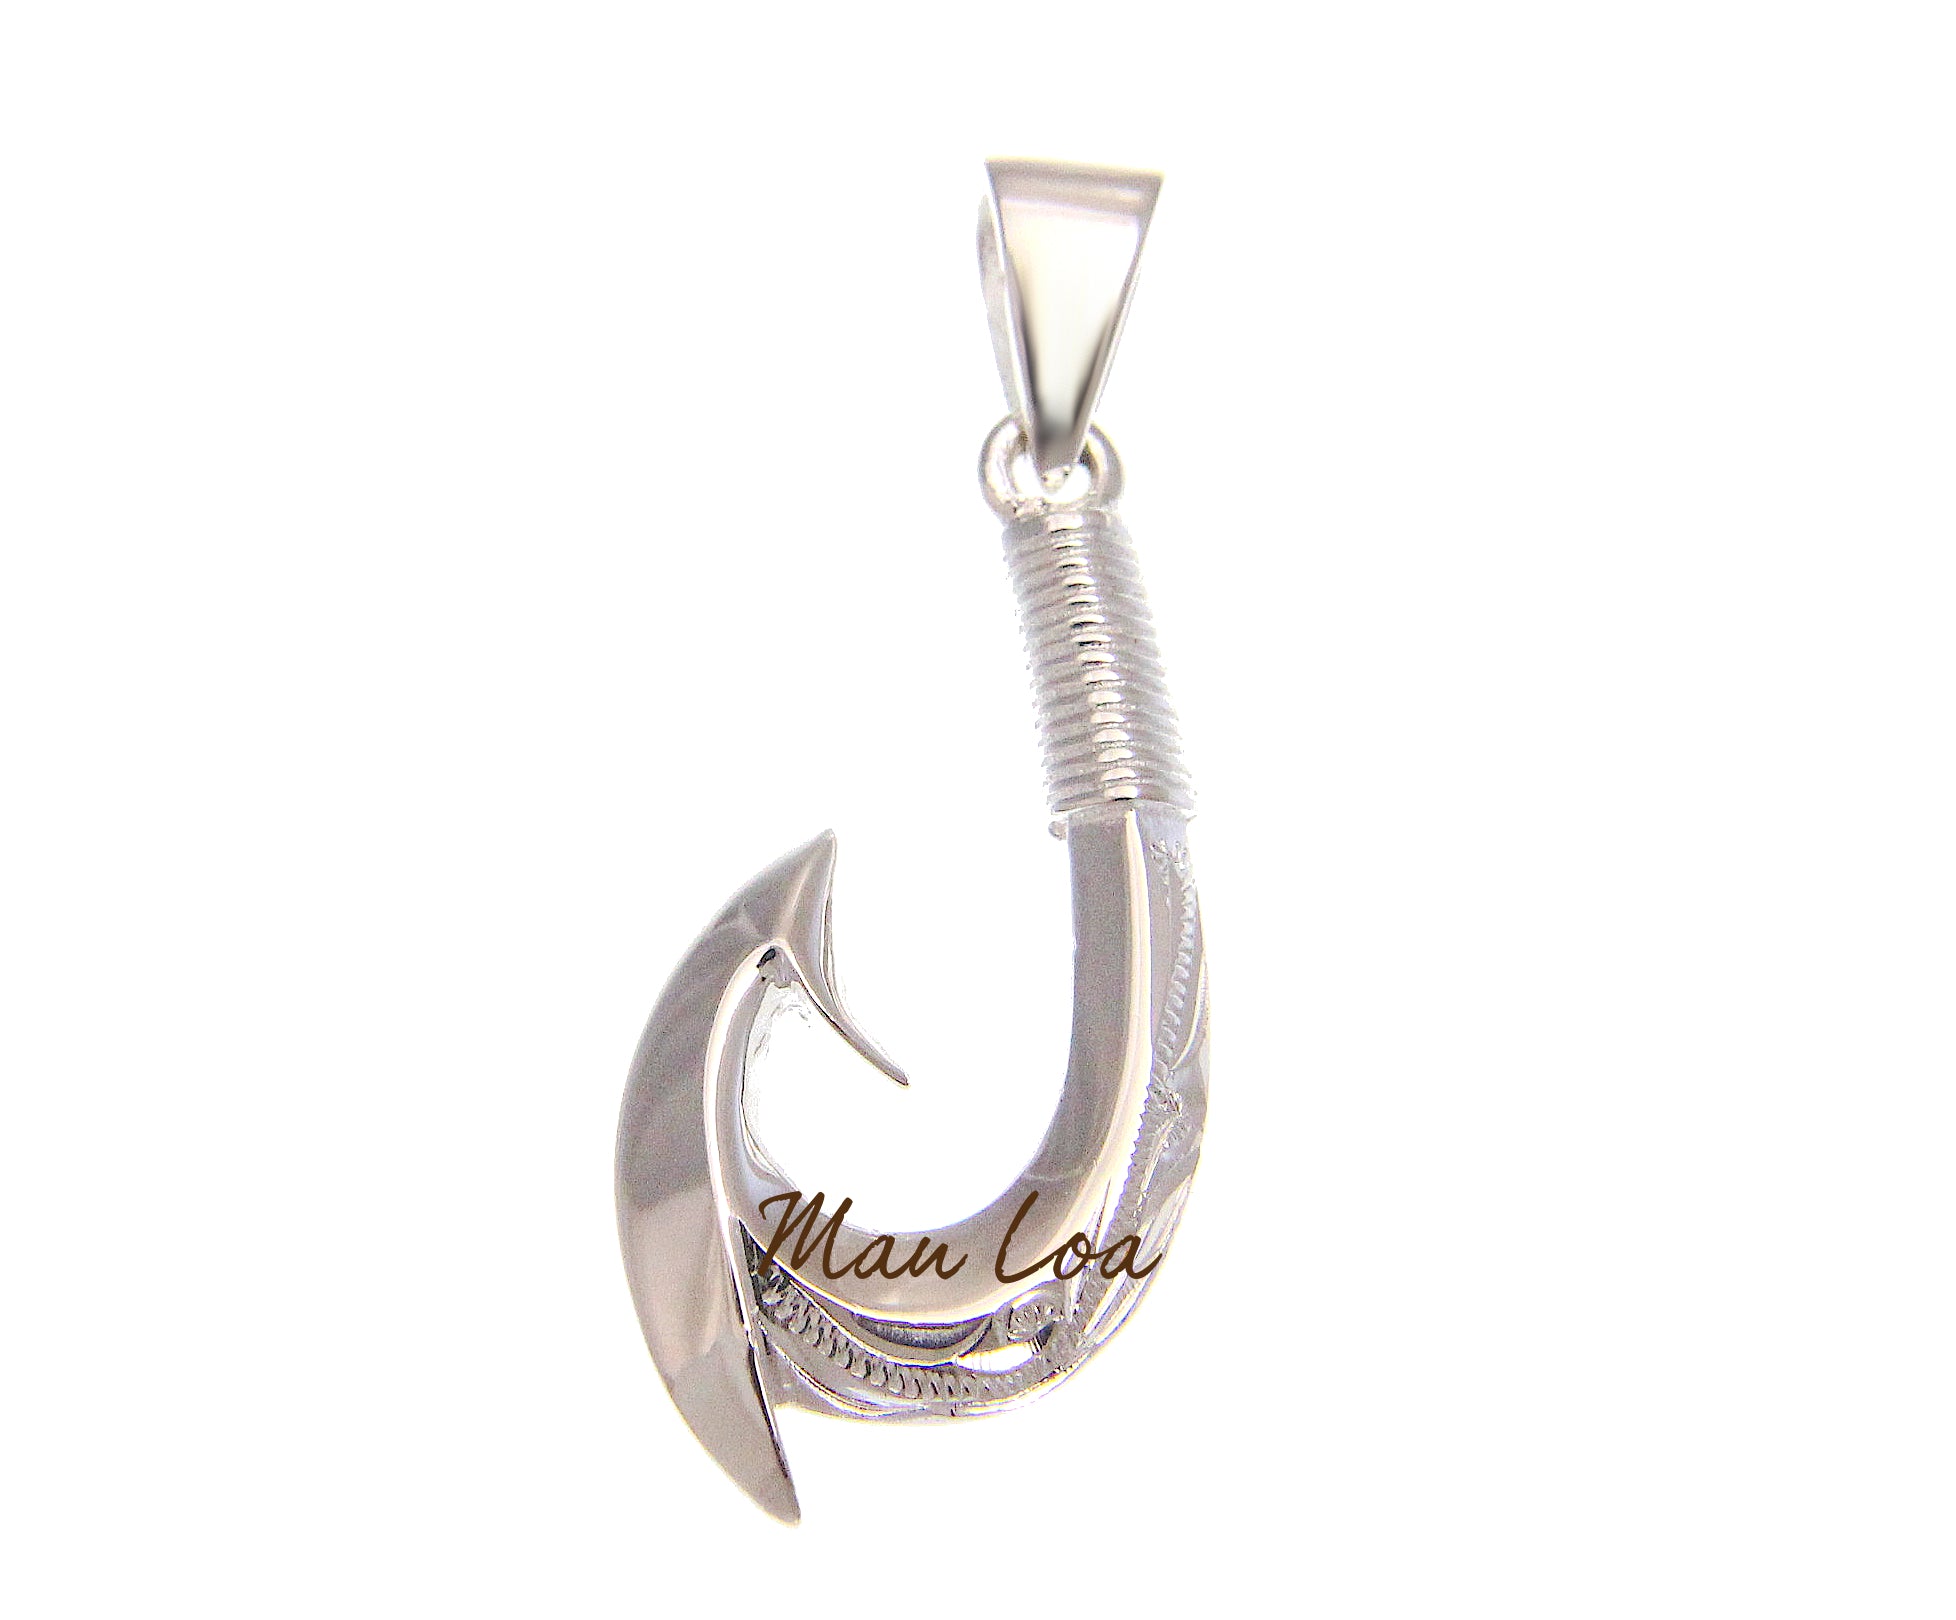 Sterling Silver Fish Hook Necklace